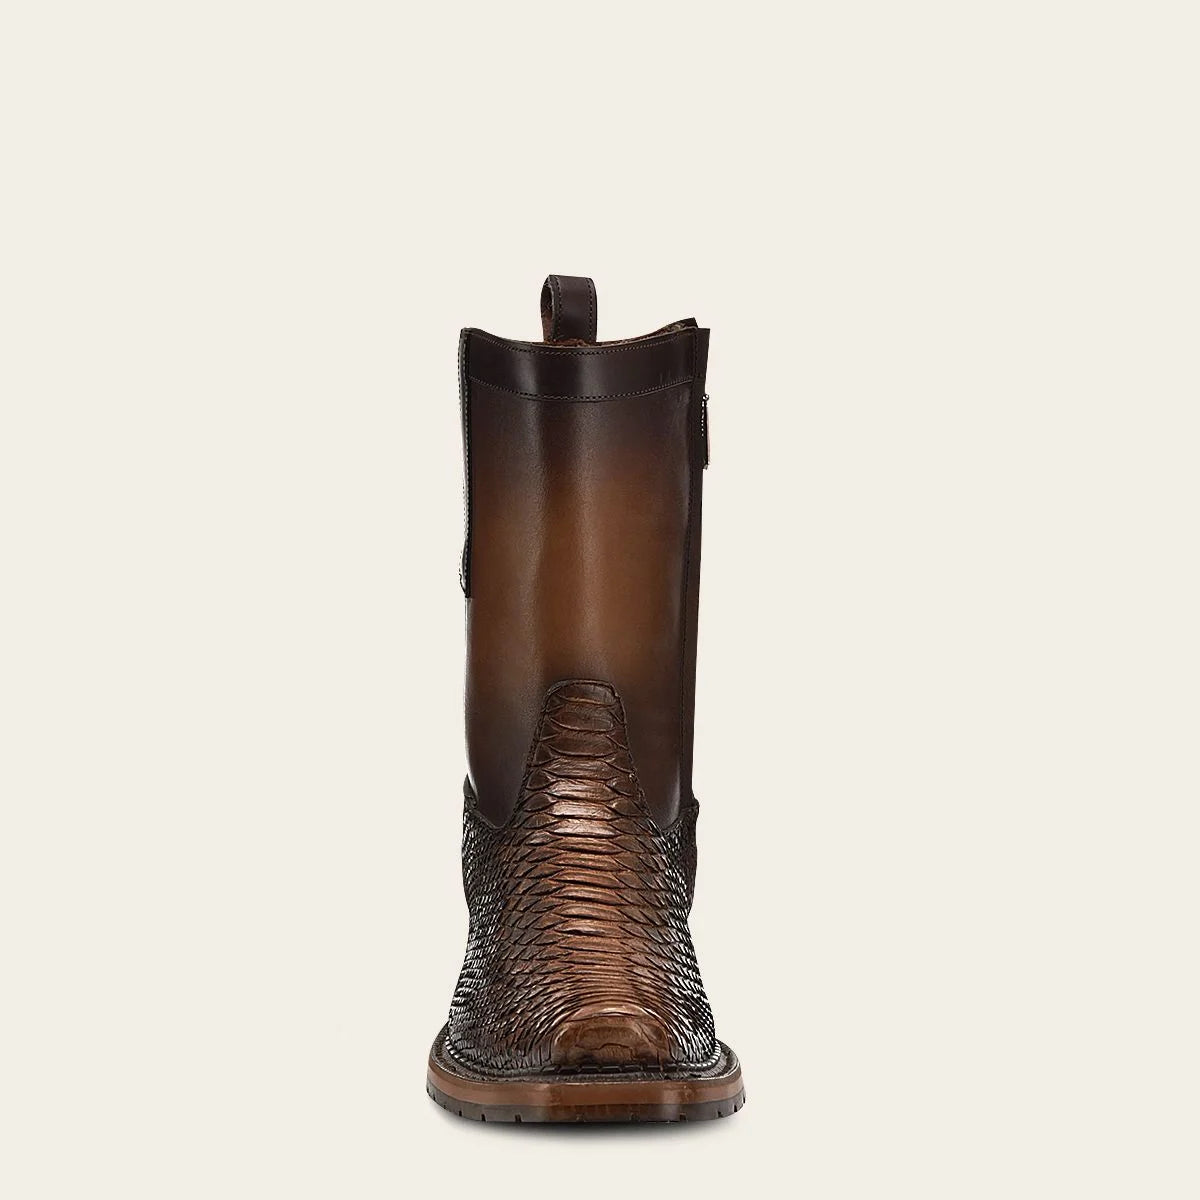 Handcrafted honey exotic leather boot